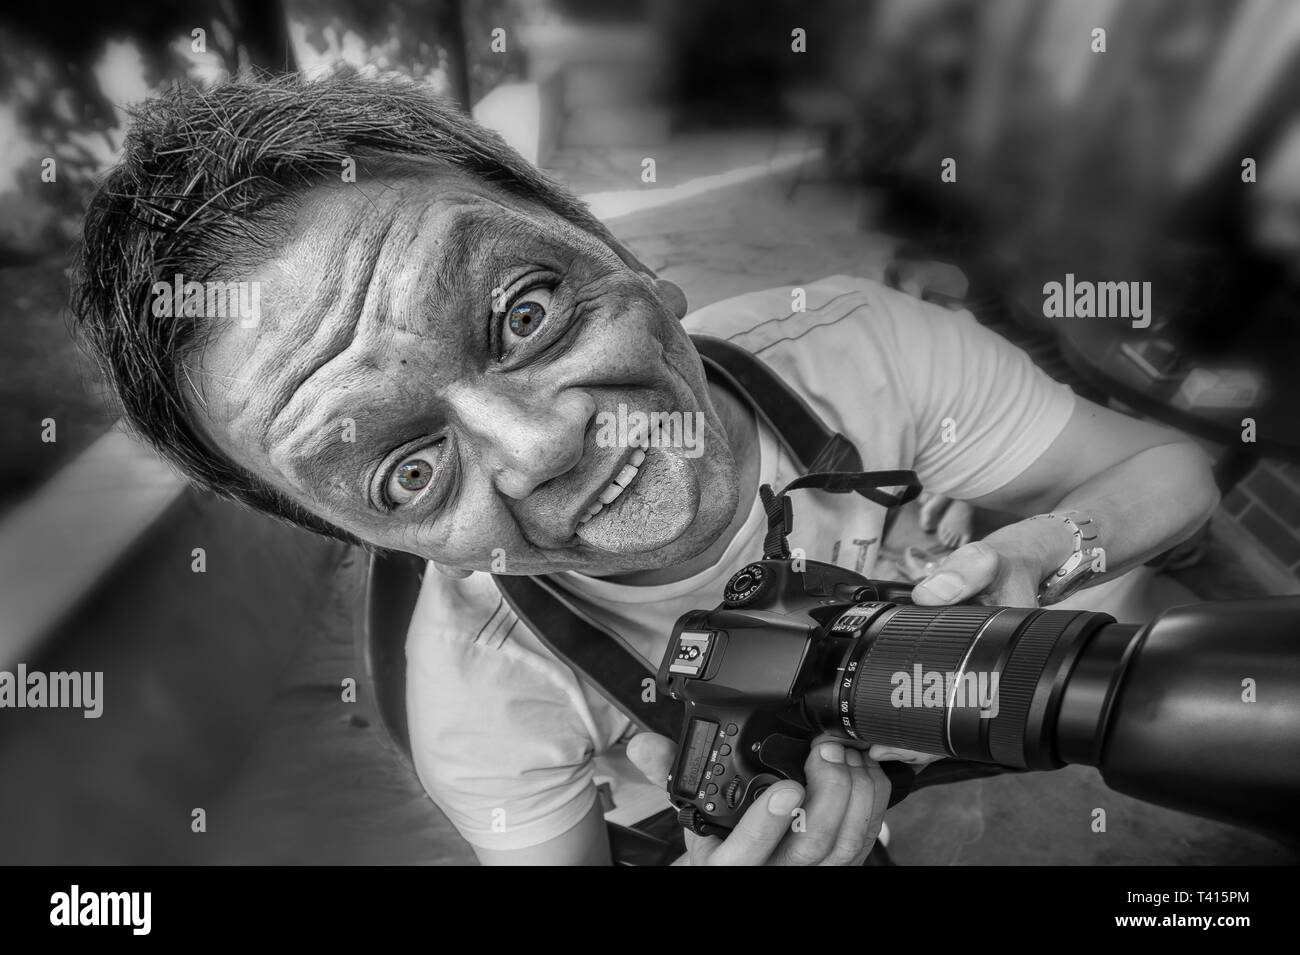 Close-up of a reporter / photographer with camera and crazy comical face Stock Photo